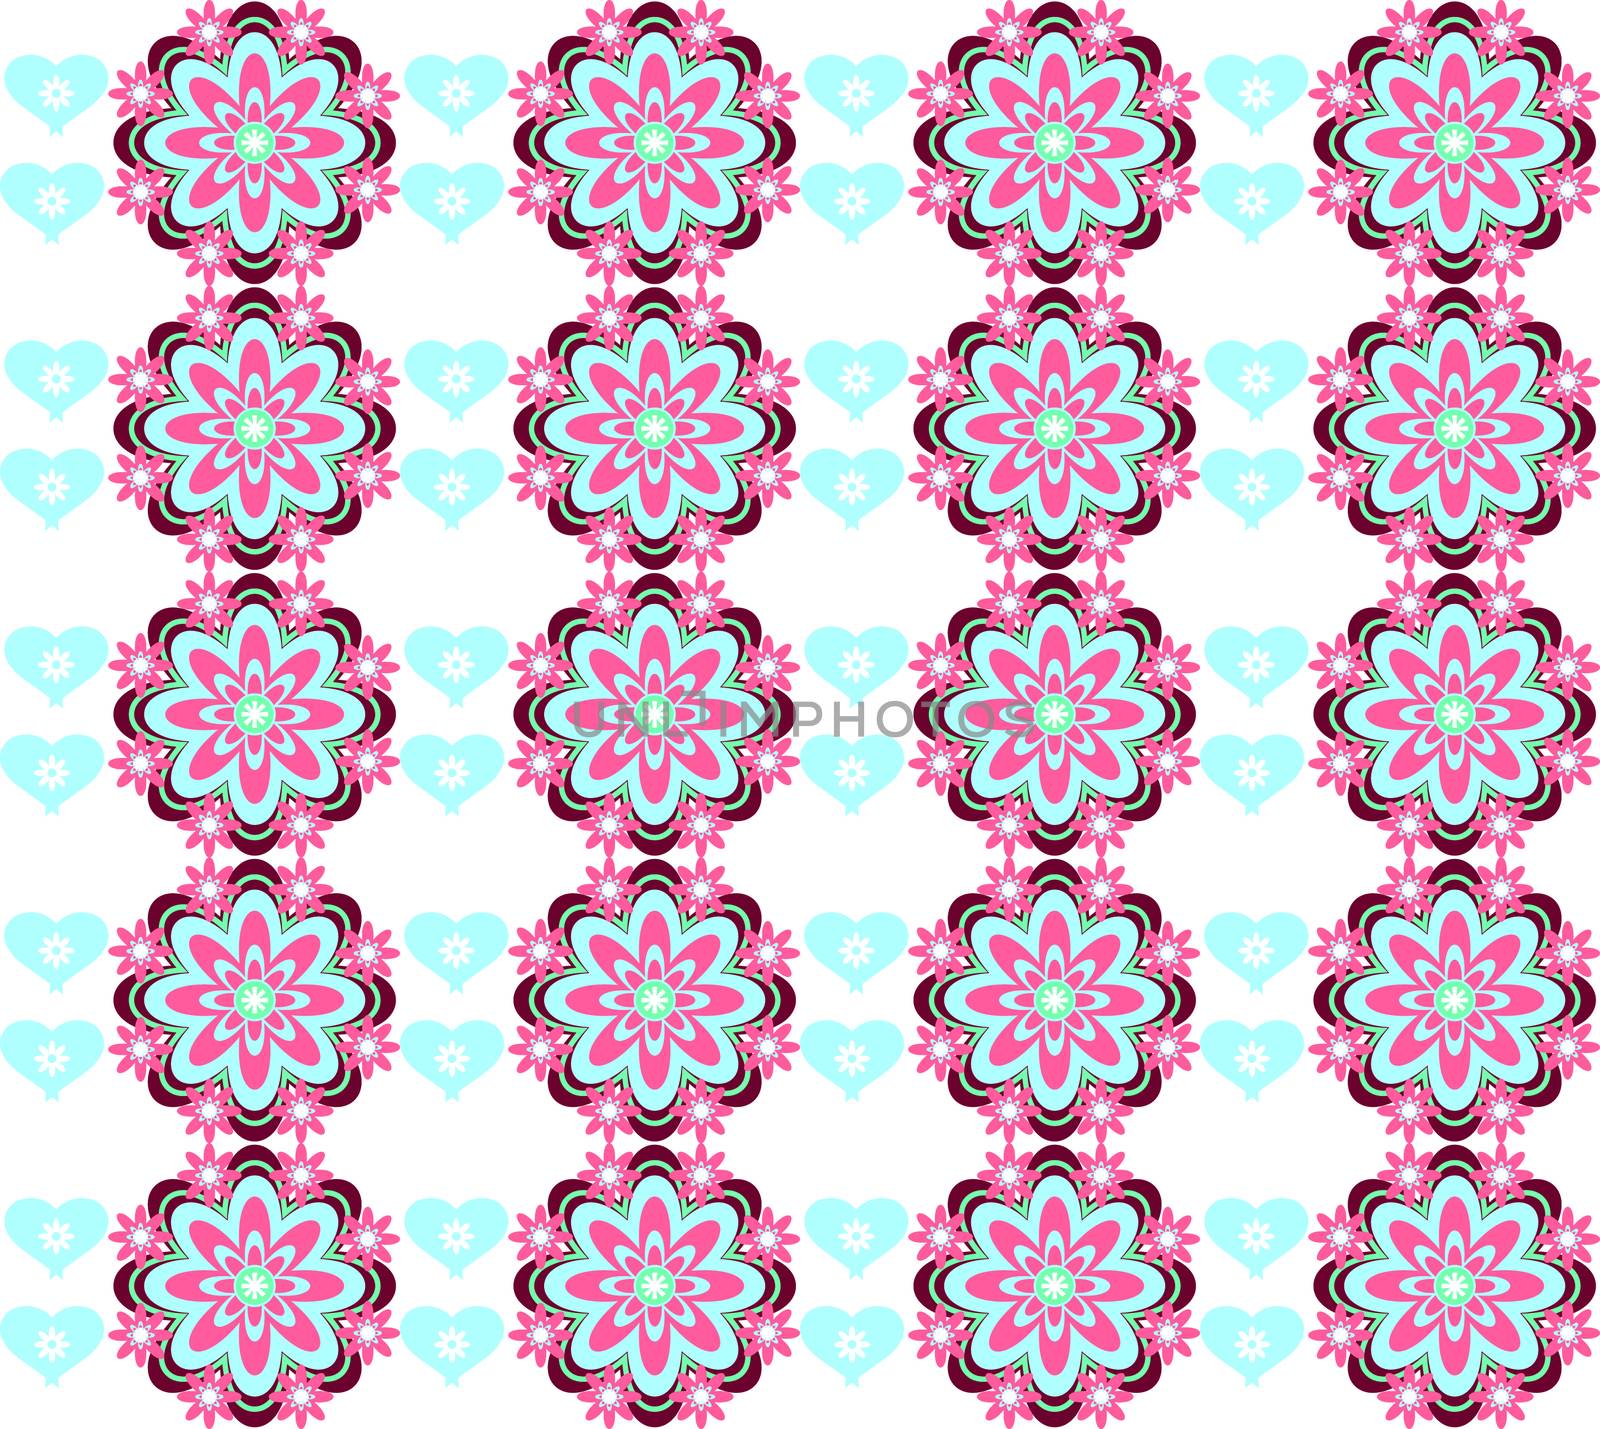 Vector flower background with hearts seamless love pattern